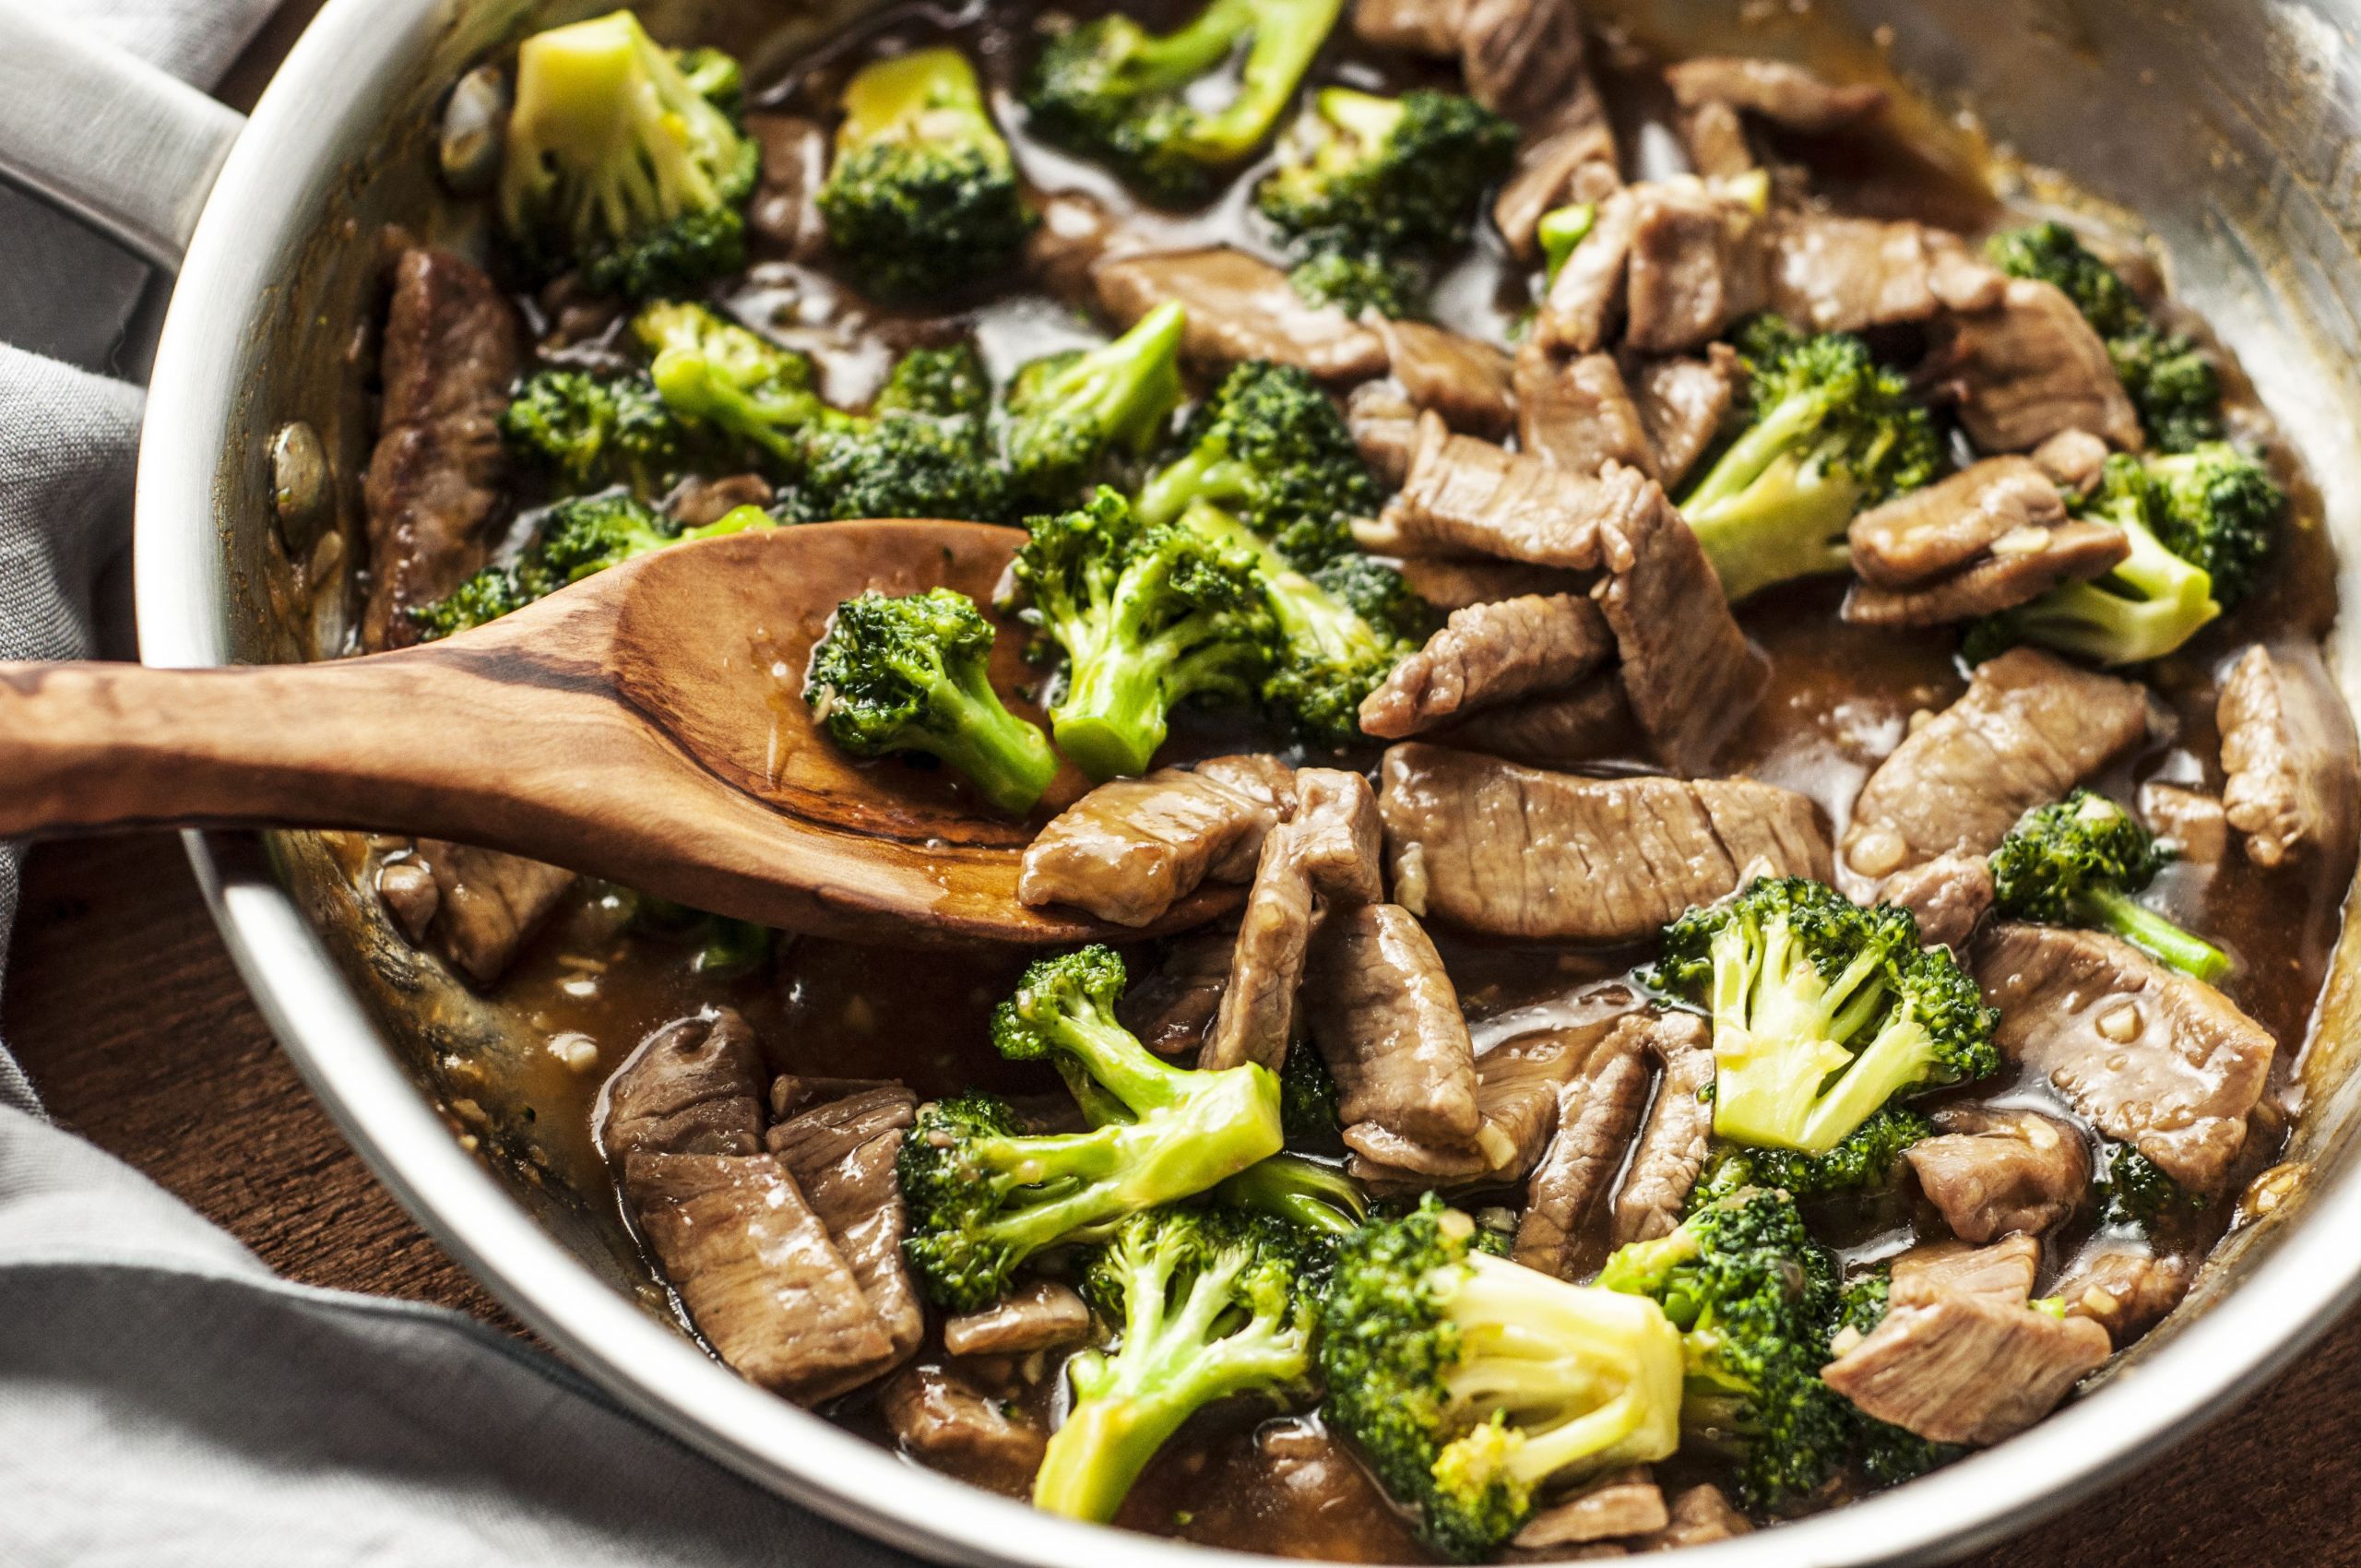 Low Calorie Stir Fry Recipes Lovely Low Calorie Healthy Beef and Broccoli Stir Fry Recipe